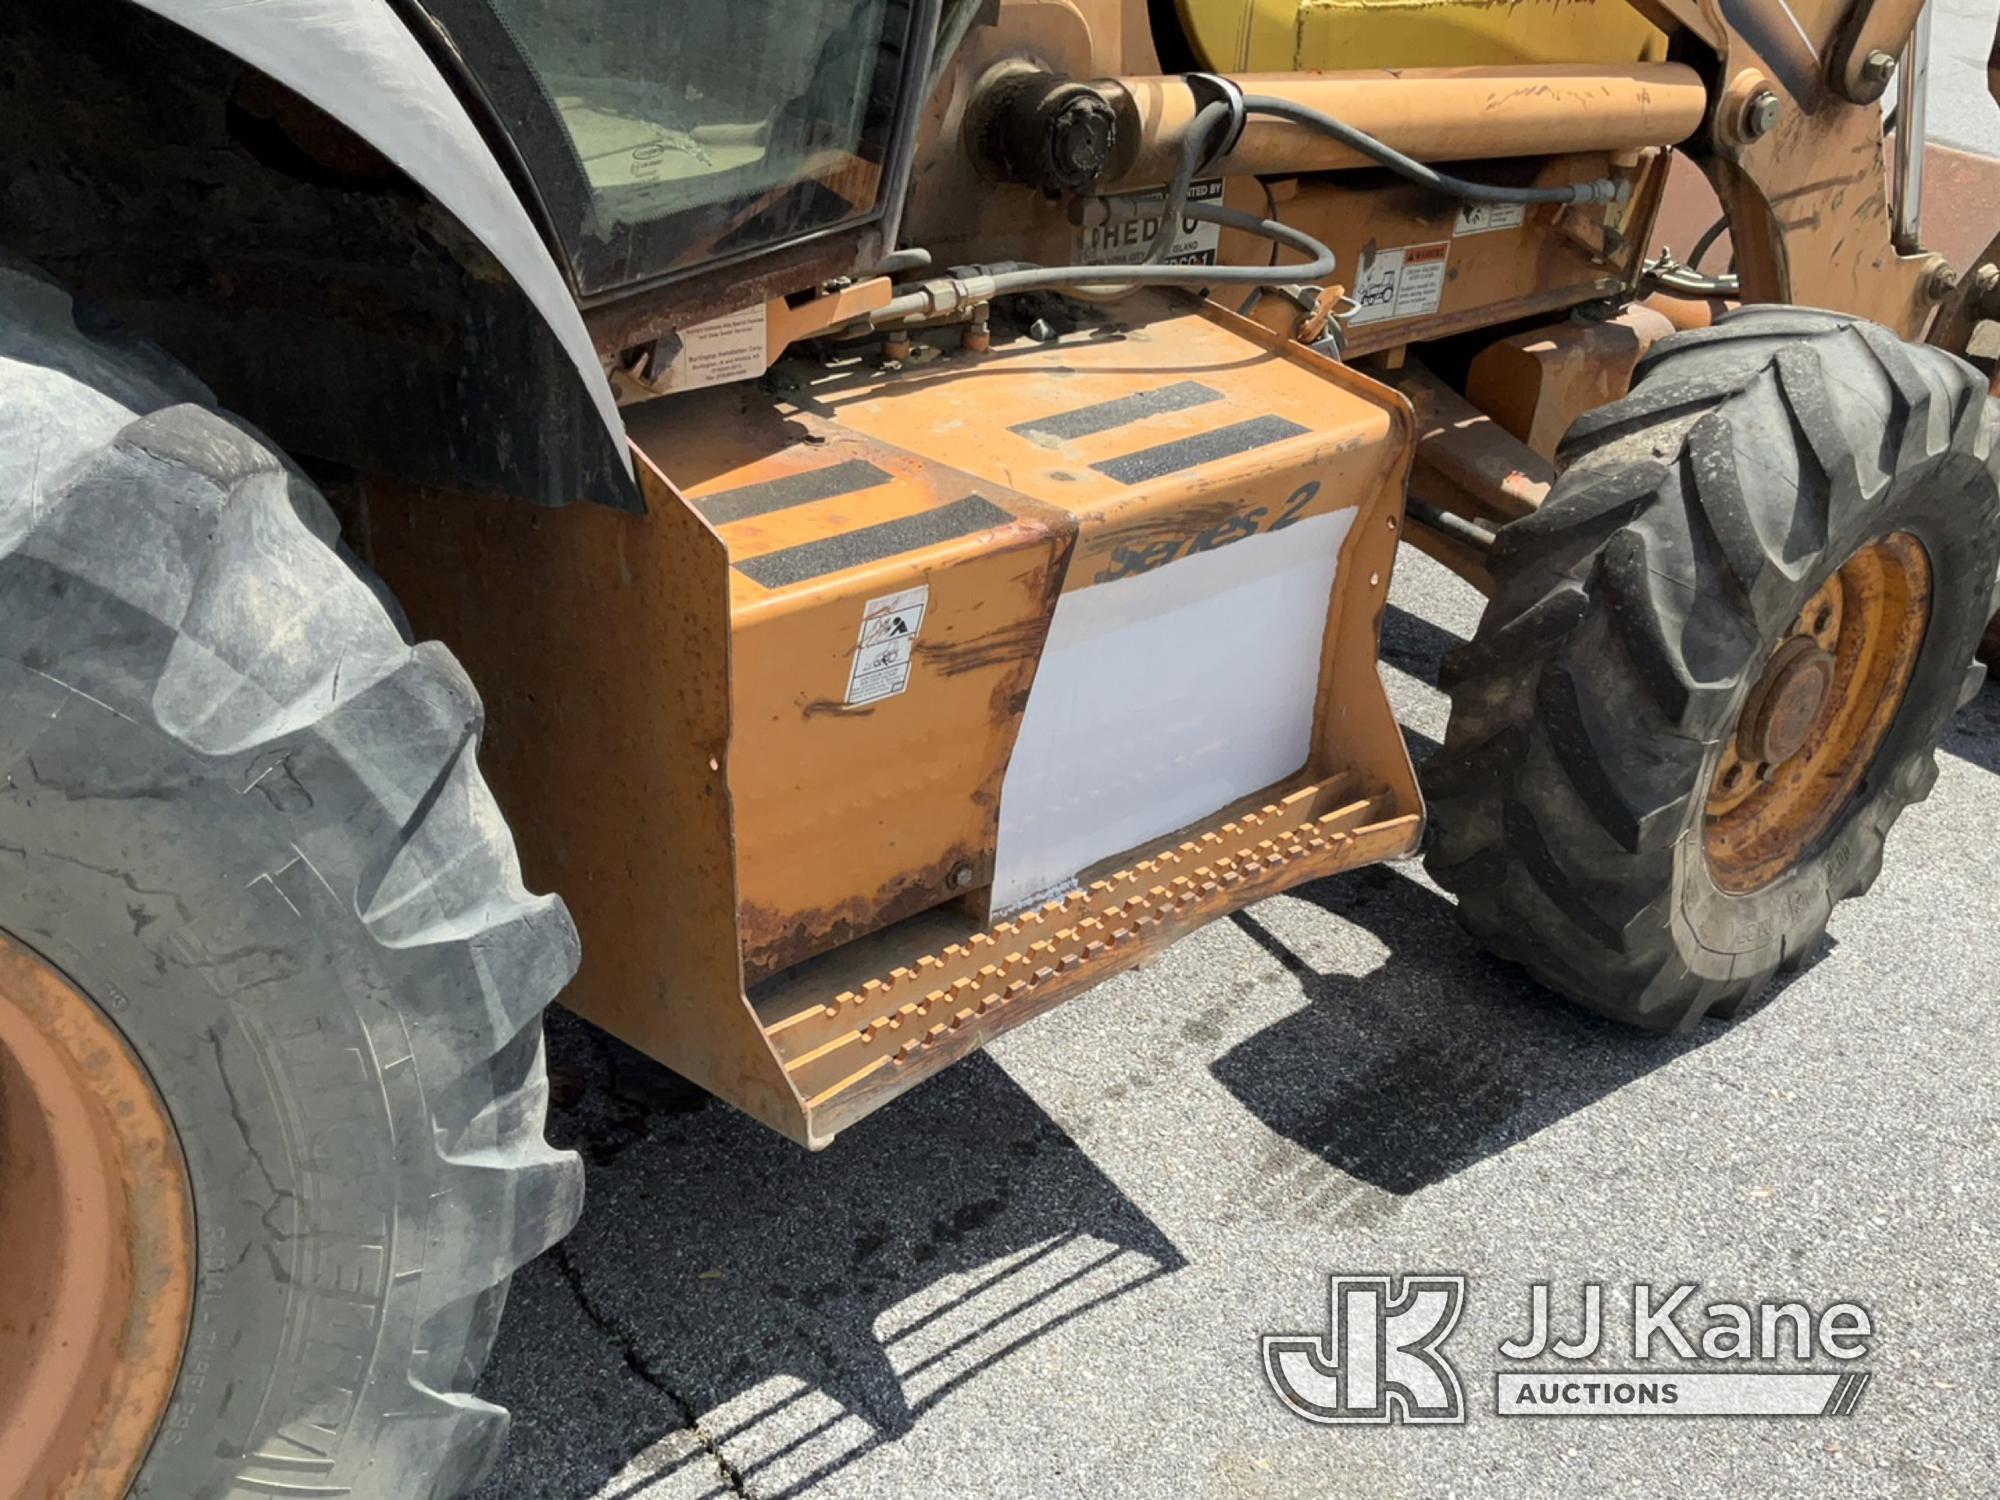 (Chester Springs, PA) 2006 Case 580M Tractor Loader Backhoe No Title) (Runs & Moves, Hyd Hammer Cond